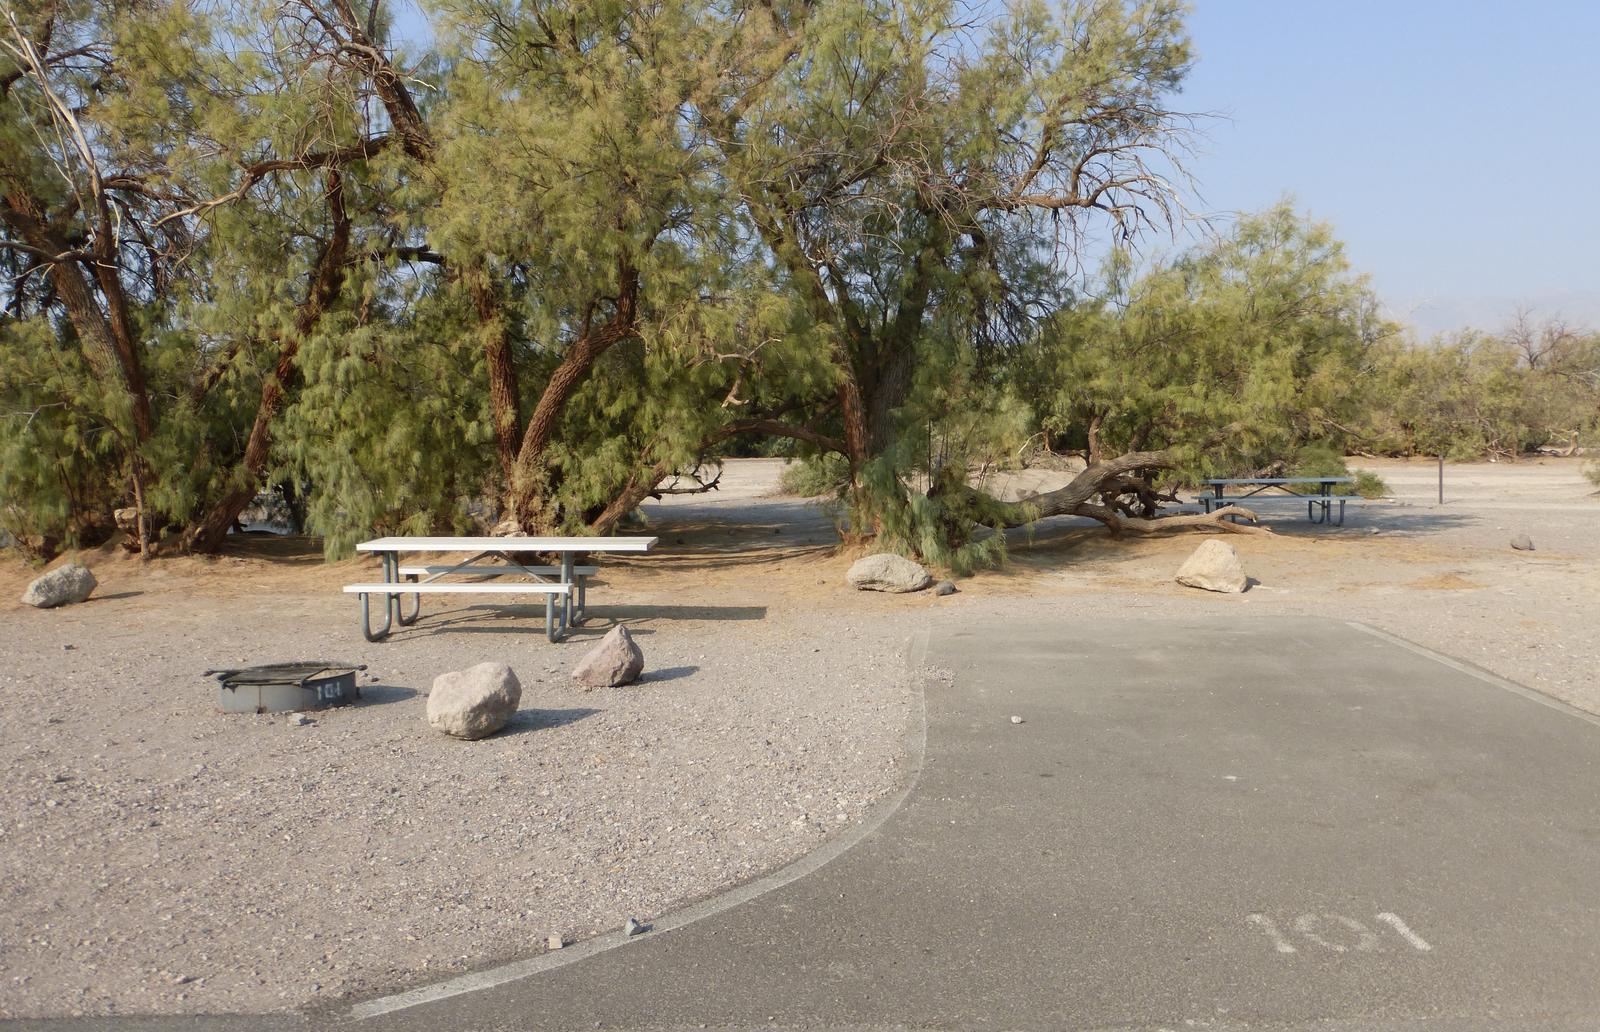 Furnace Creek Campground standard nonelectric tent only drive in site #101 with picnic table and fire ring.